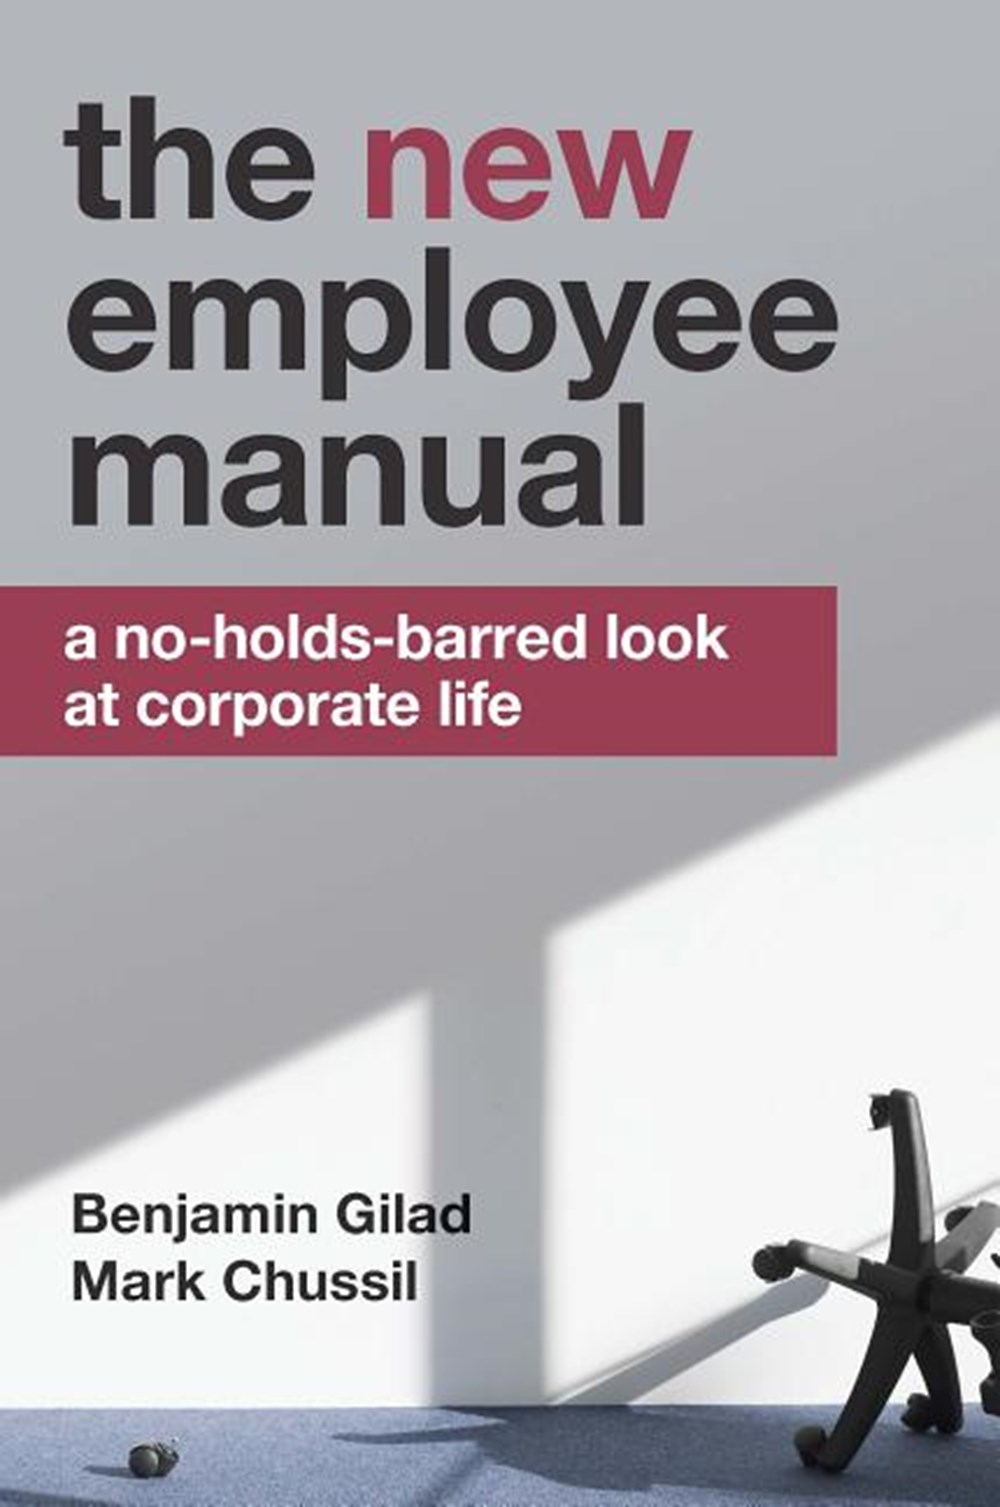 New Employee Manual: A No-Holds-Barred Look at Corporate Life